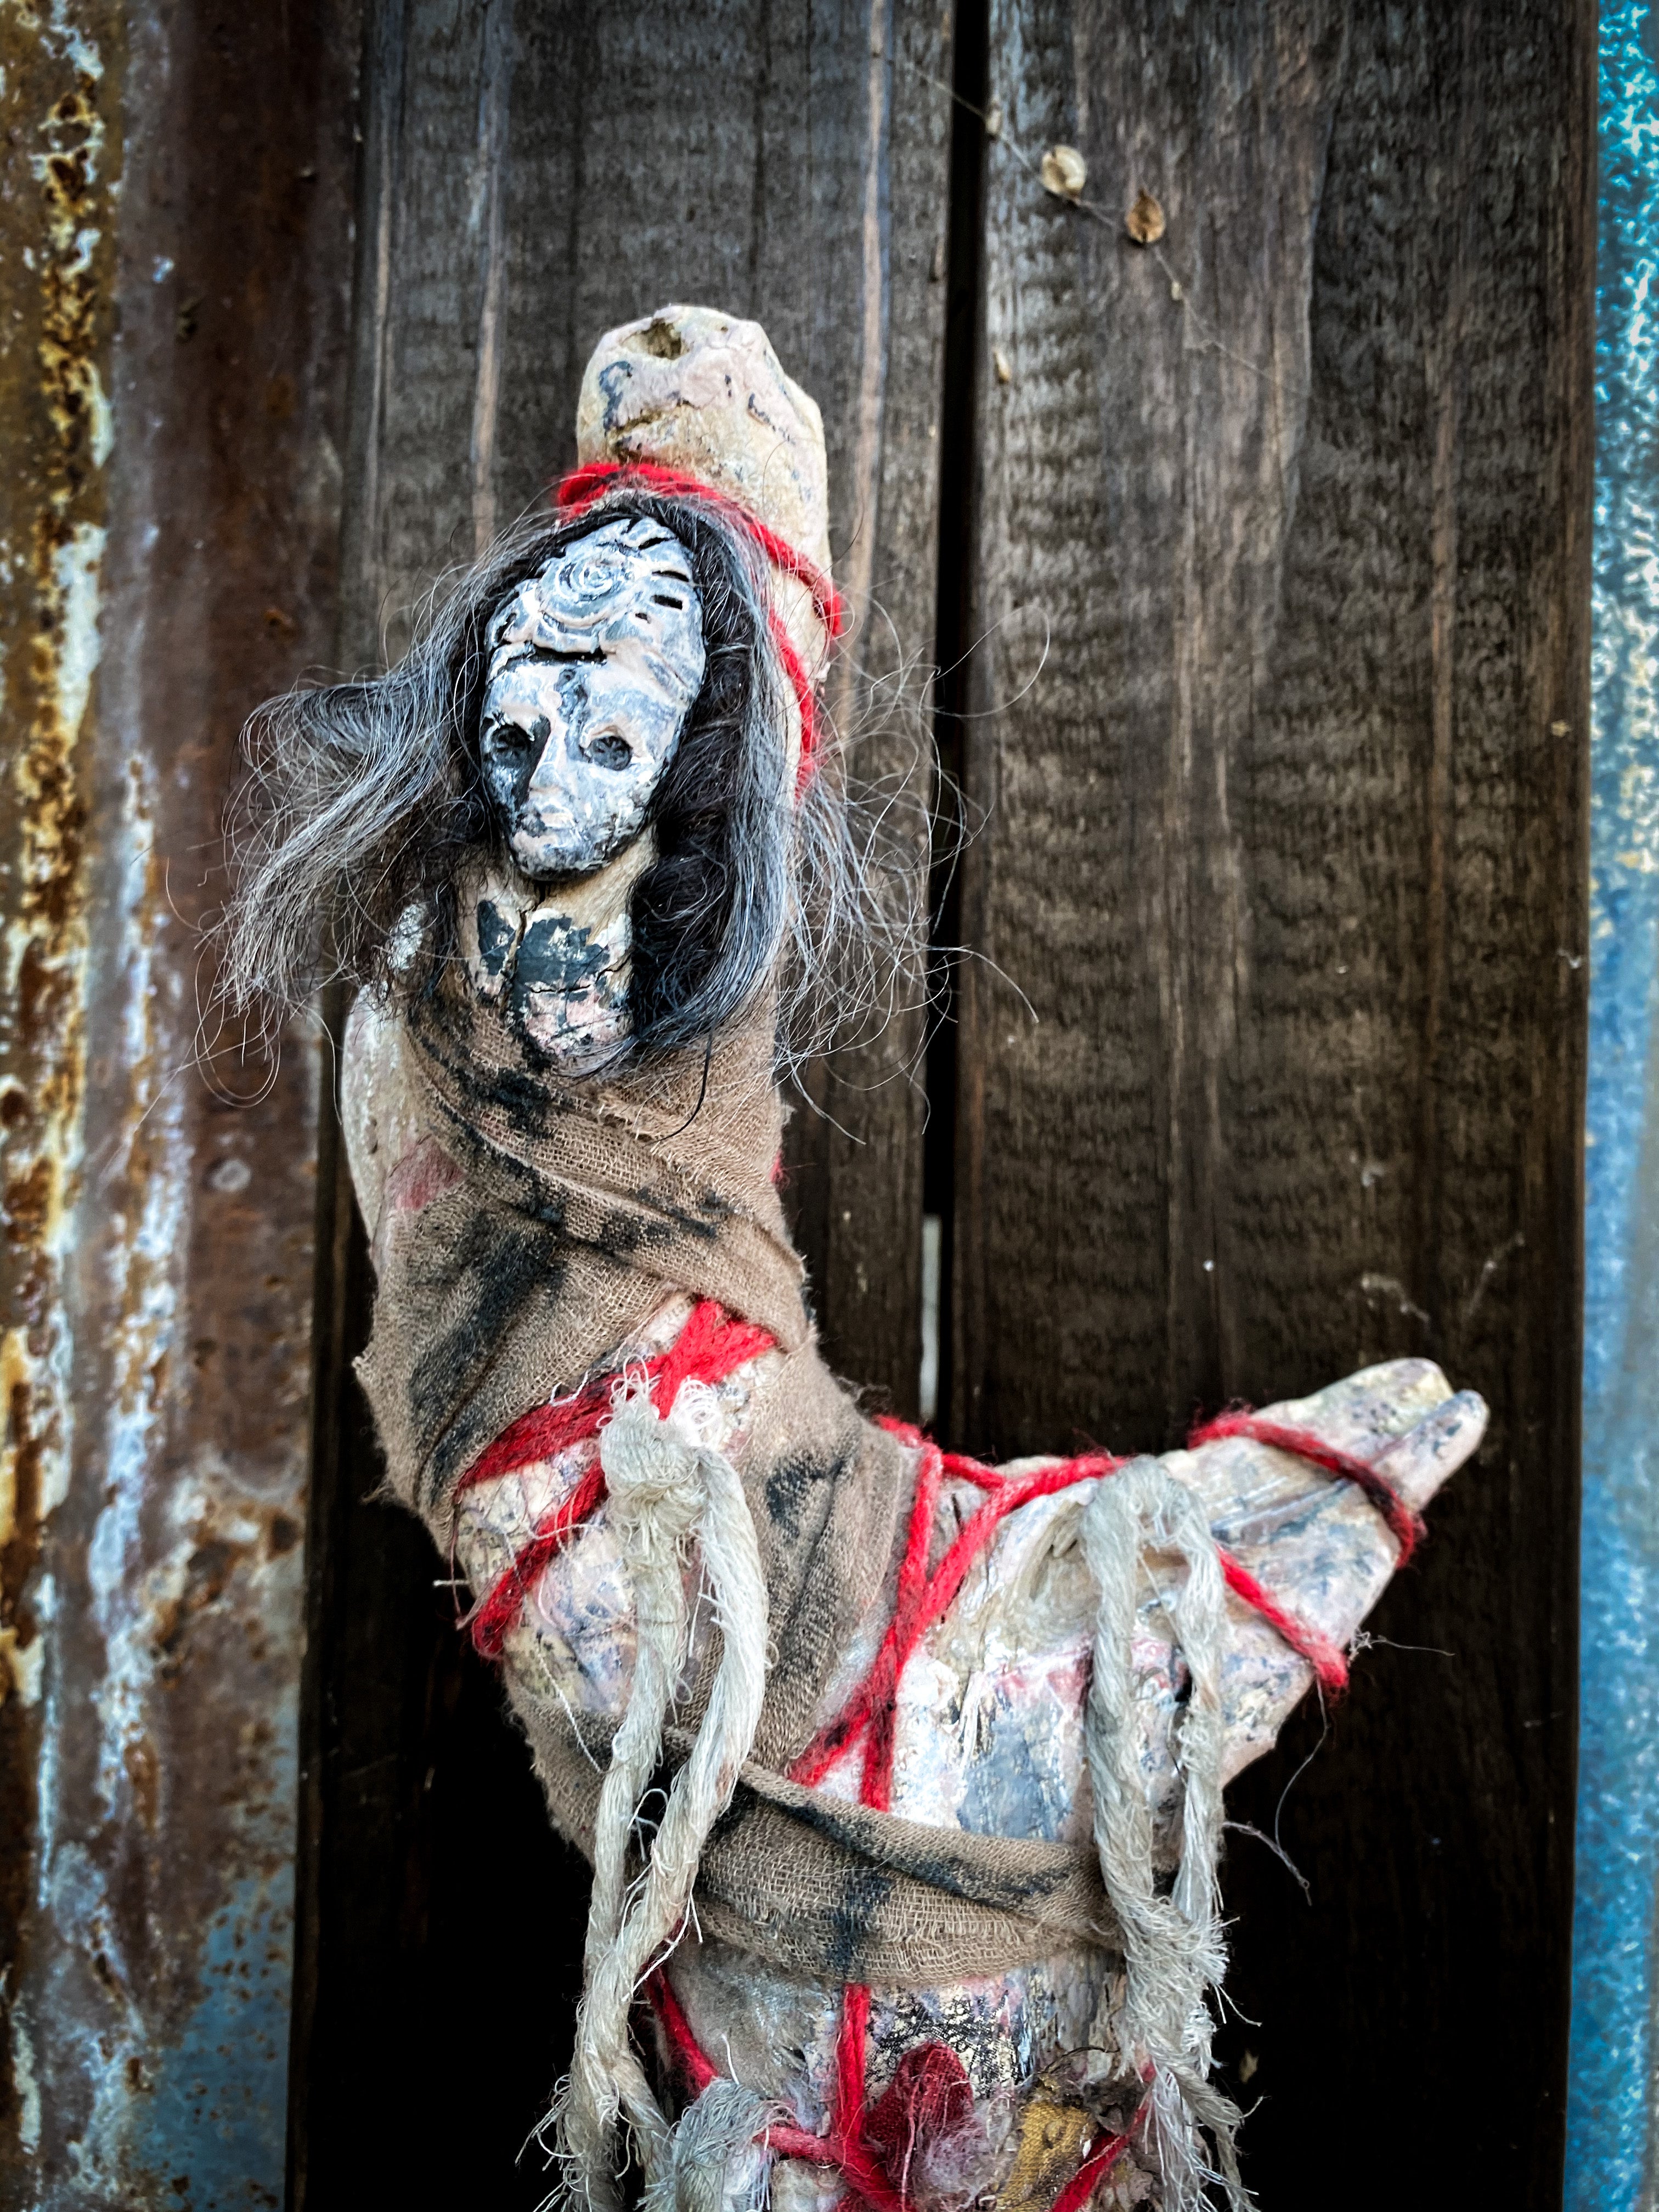 Conjure Doll for Non-Judgment - Spirit Doll - Medicine Doll - JuJu Doll - Women of the World Series